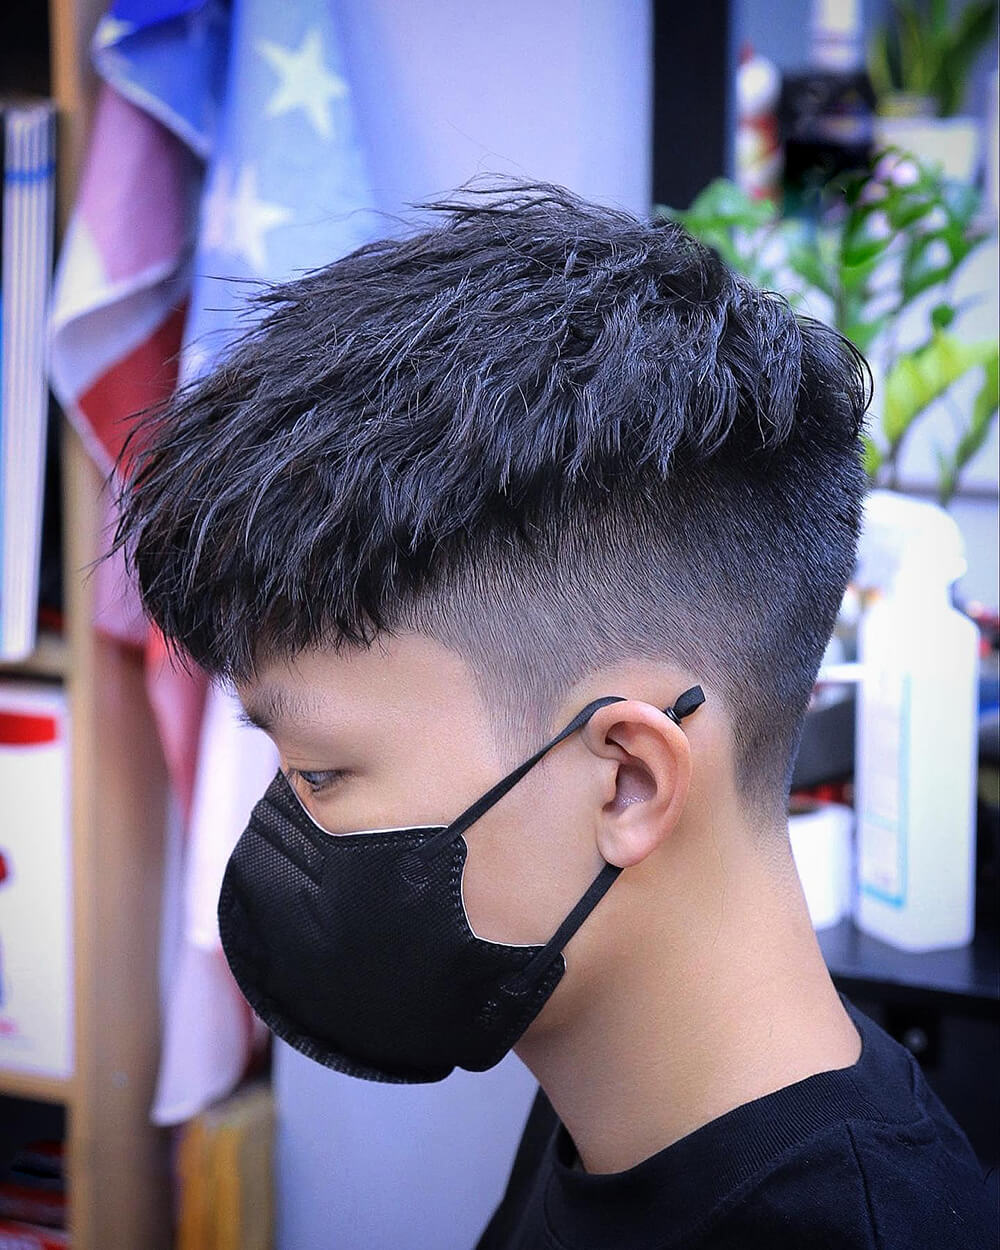 Rat tail hairstyle, a cropped or shaved head with a small long grown  section of hair at the back